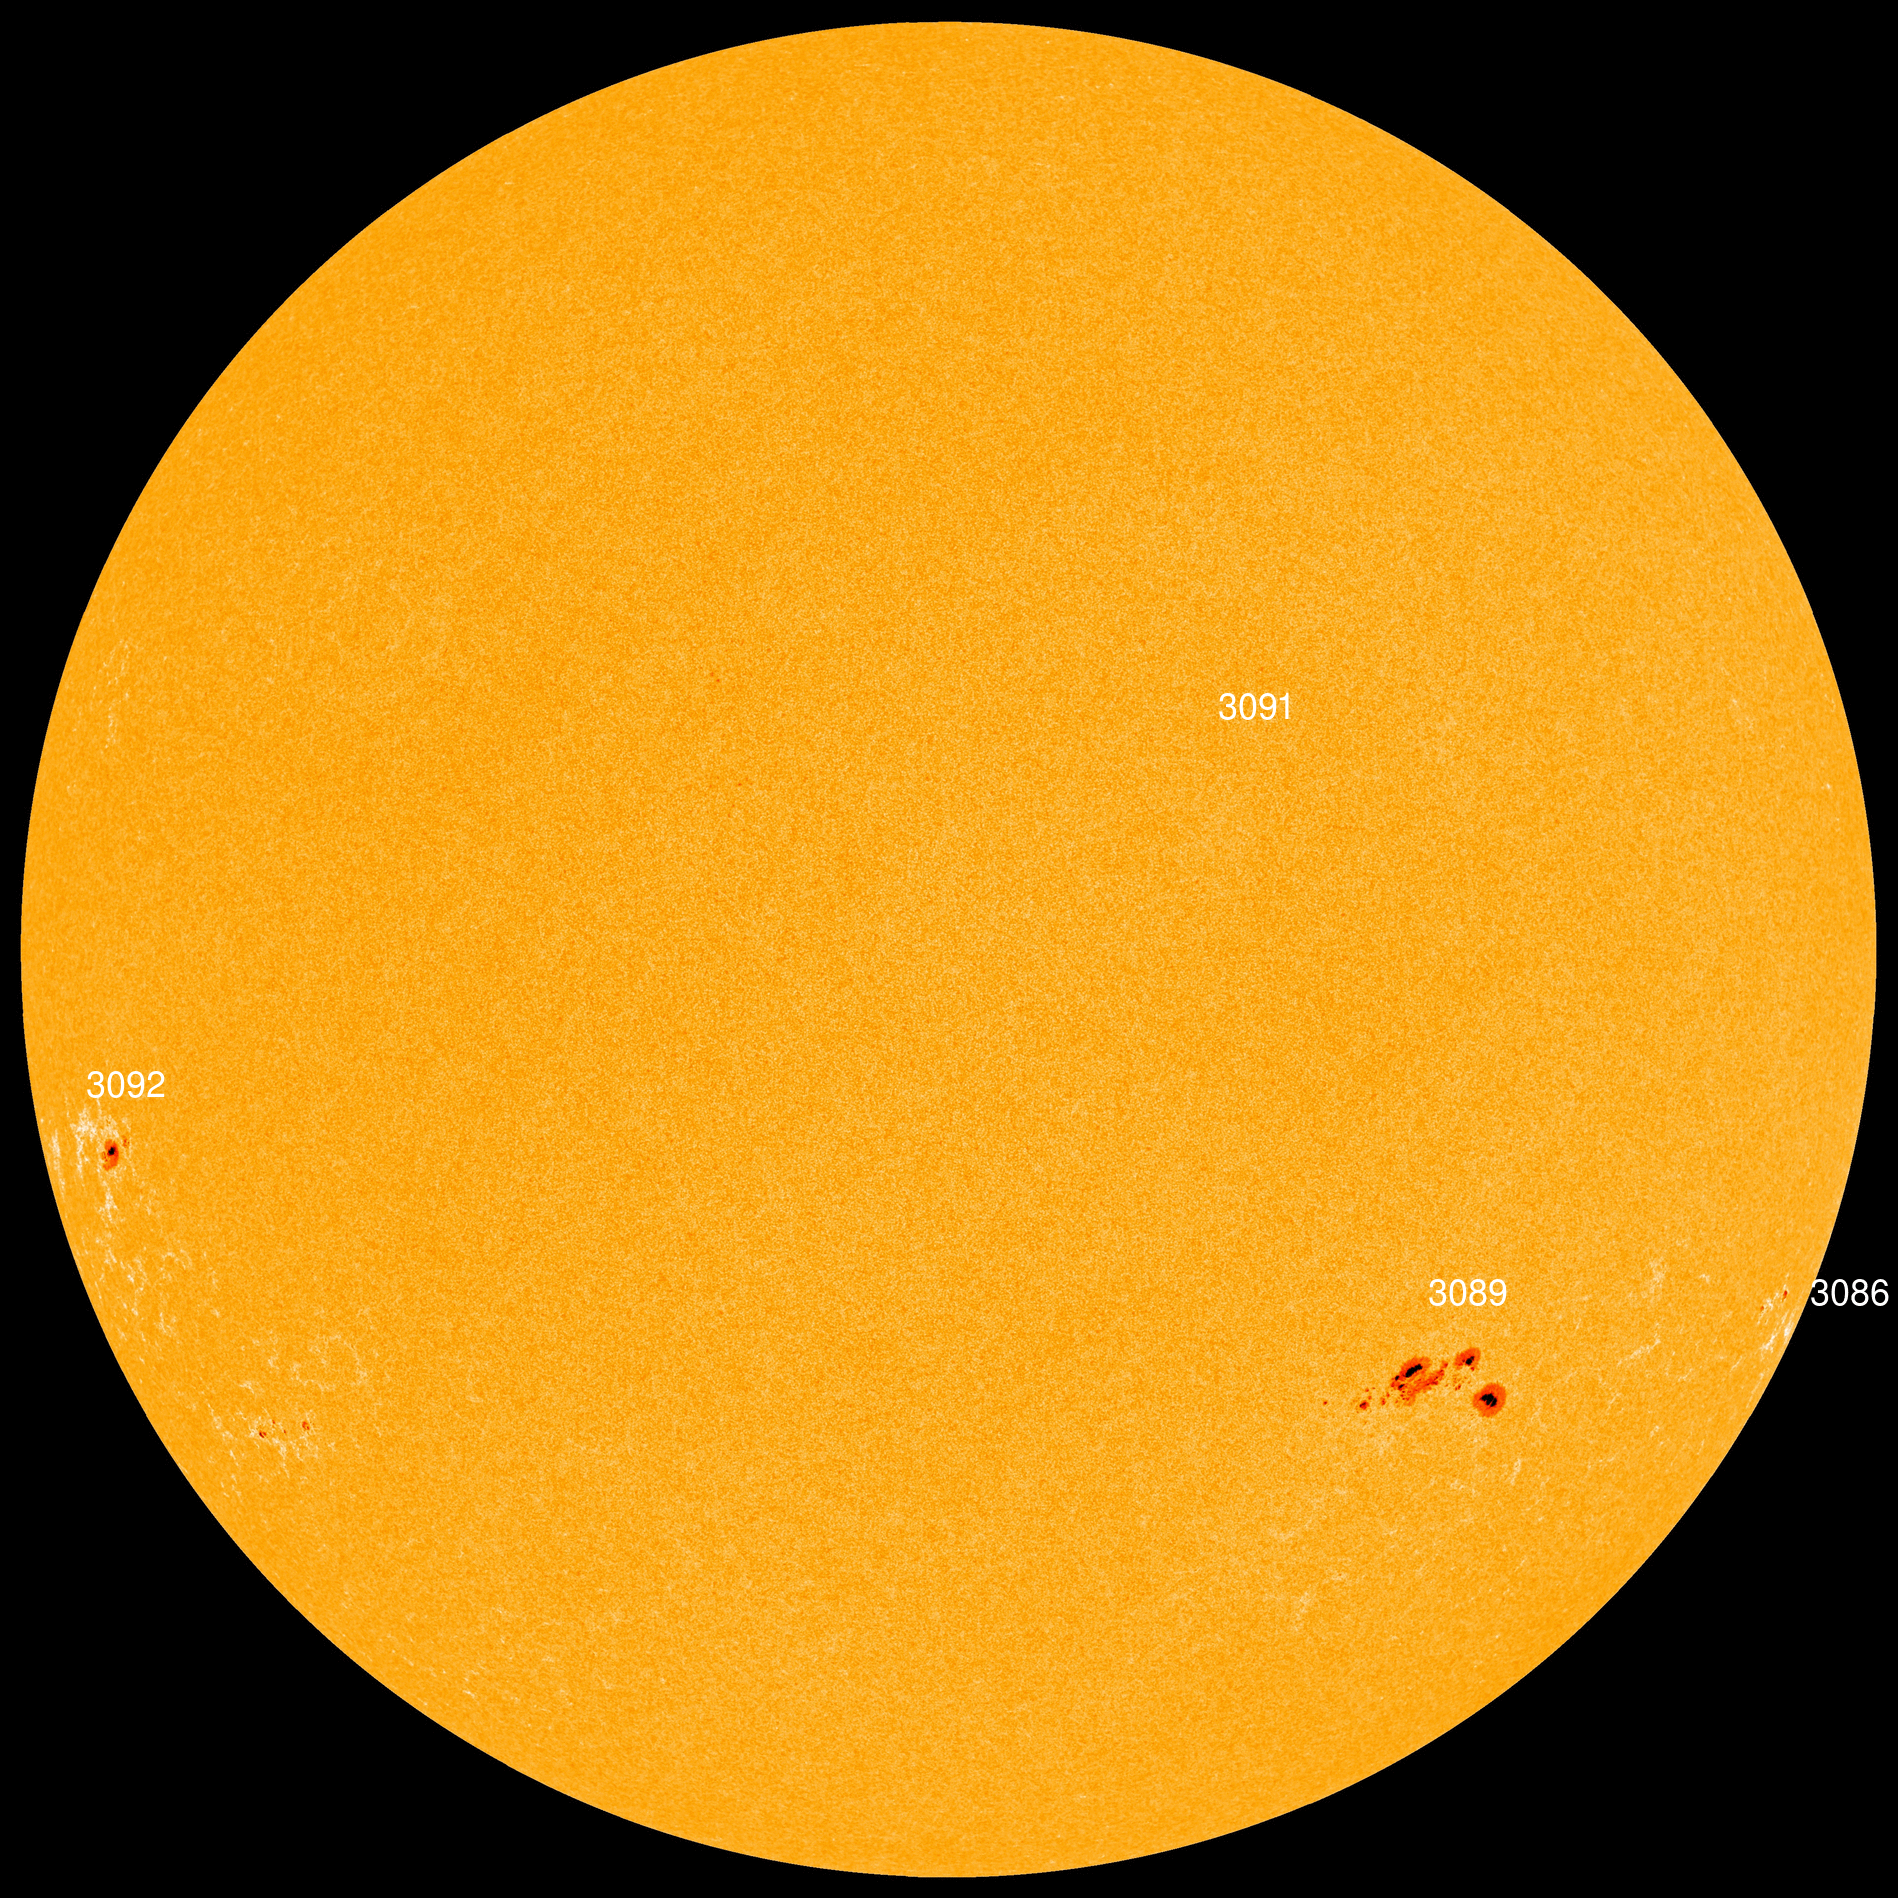 X-class solar flares can be generated by the delta-class magnetic field of sunspot AR3089. Credit: SDO/HMI.